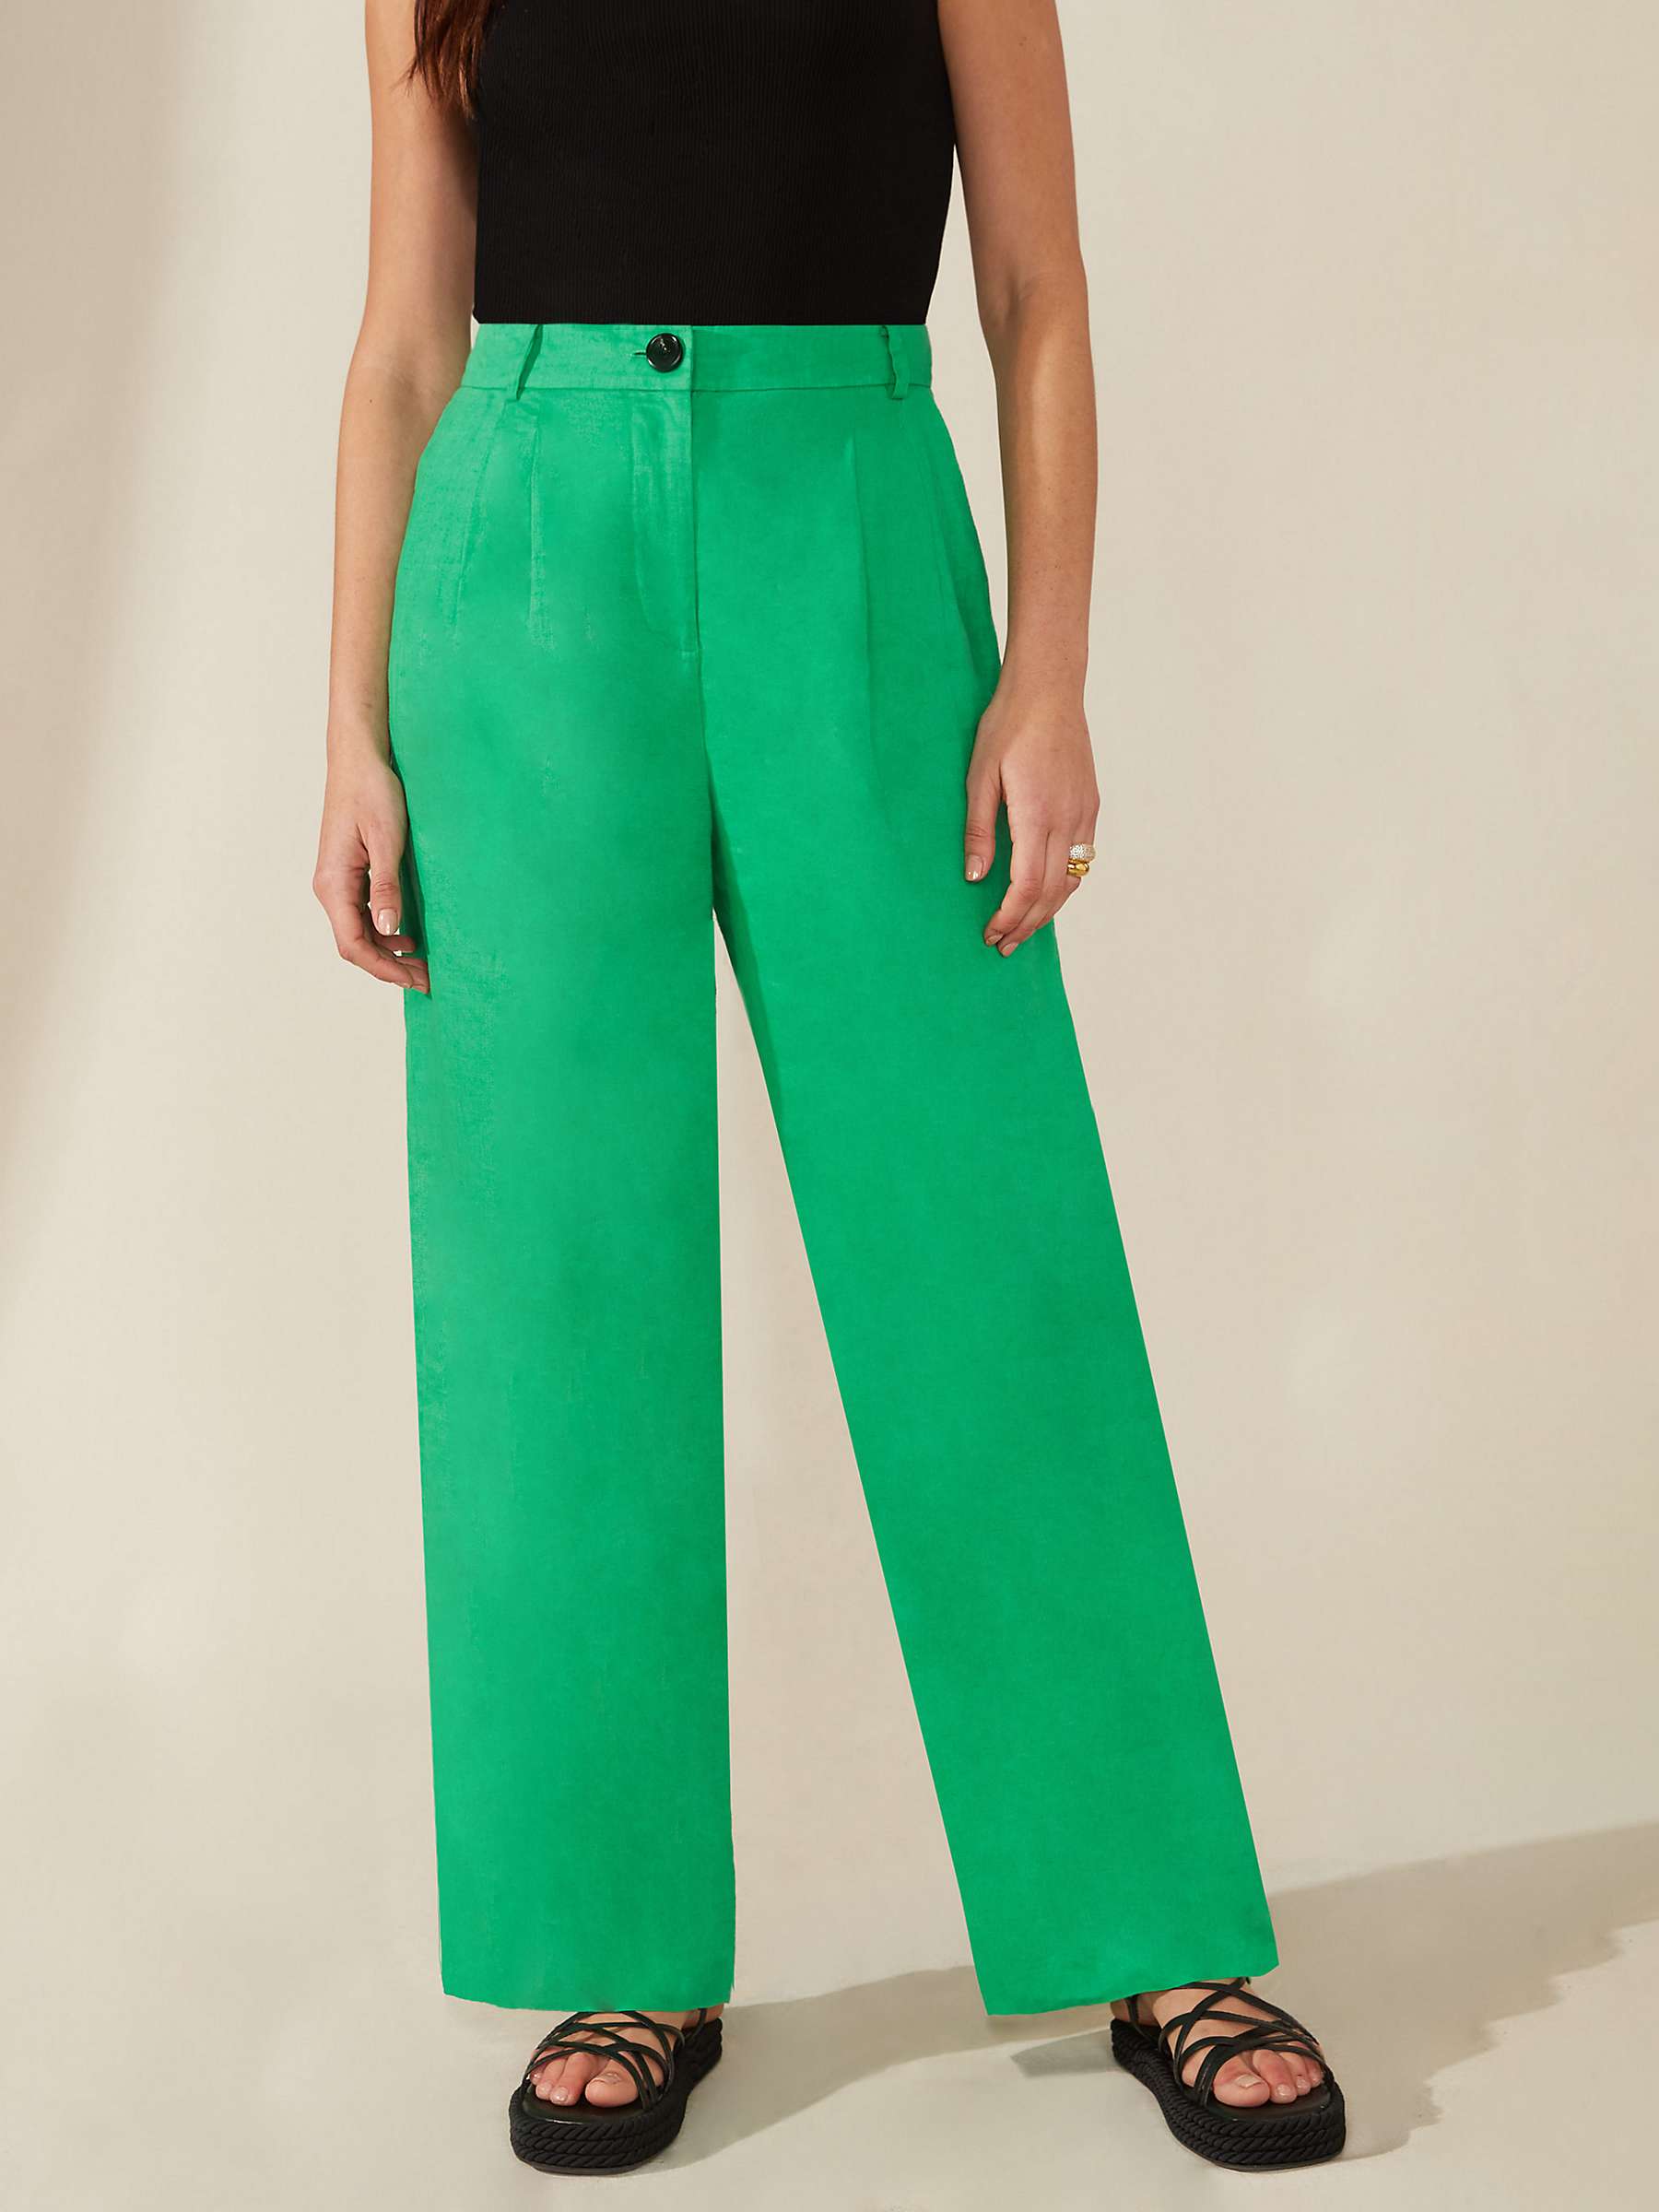 Ro&Zo Button Front Linen Trousers, Green at John Lewis & Partners